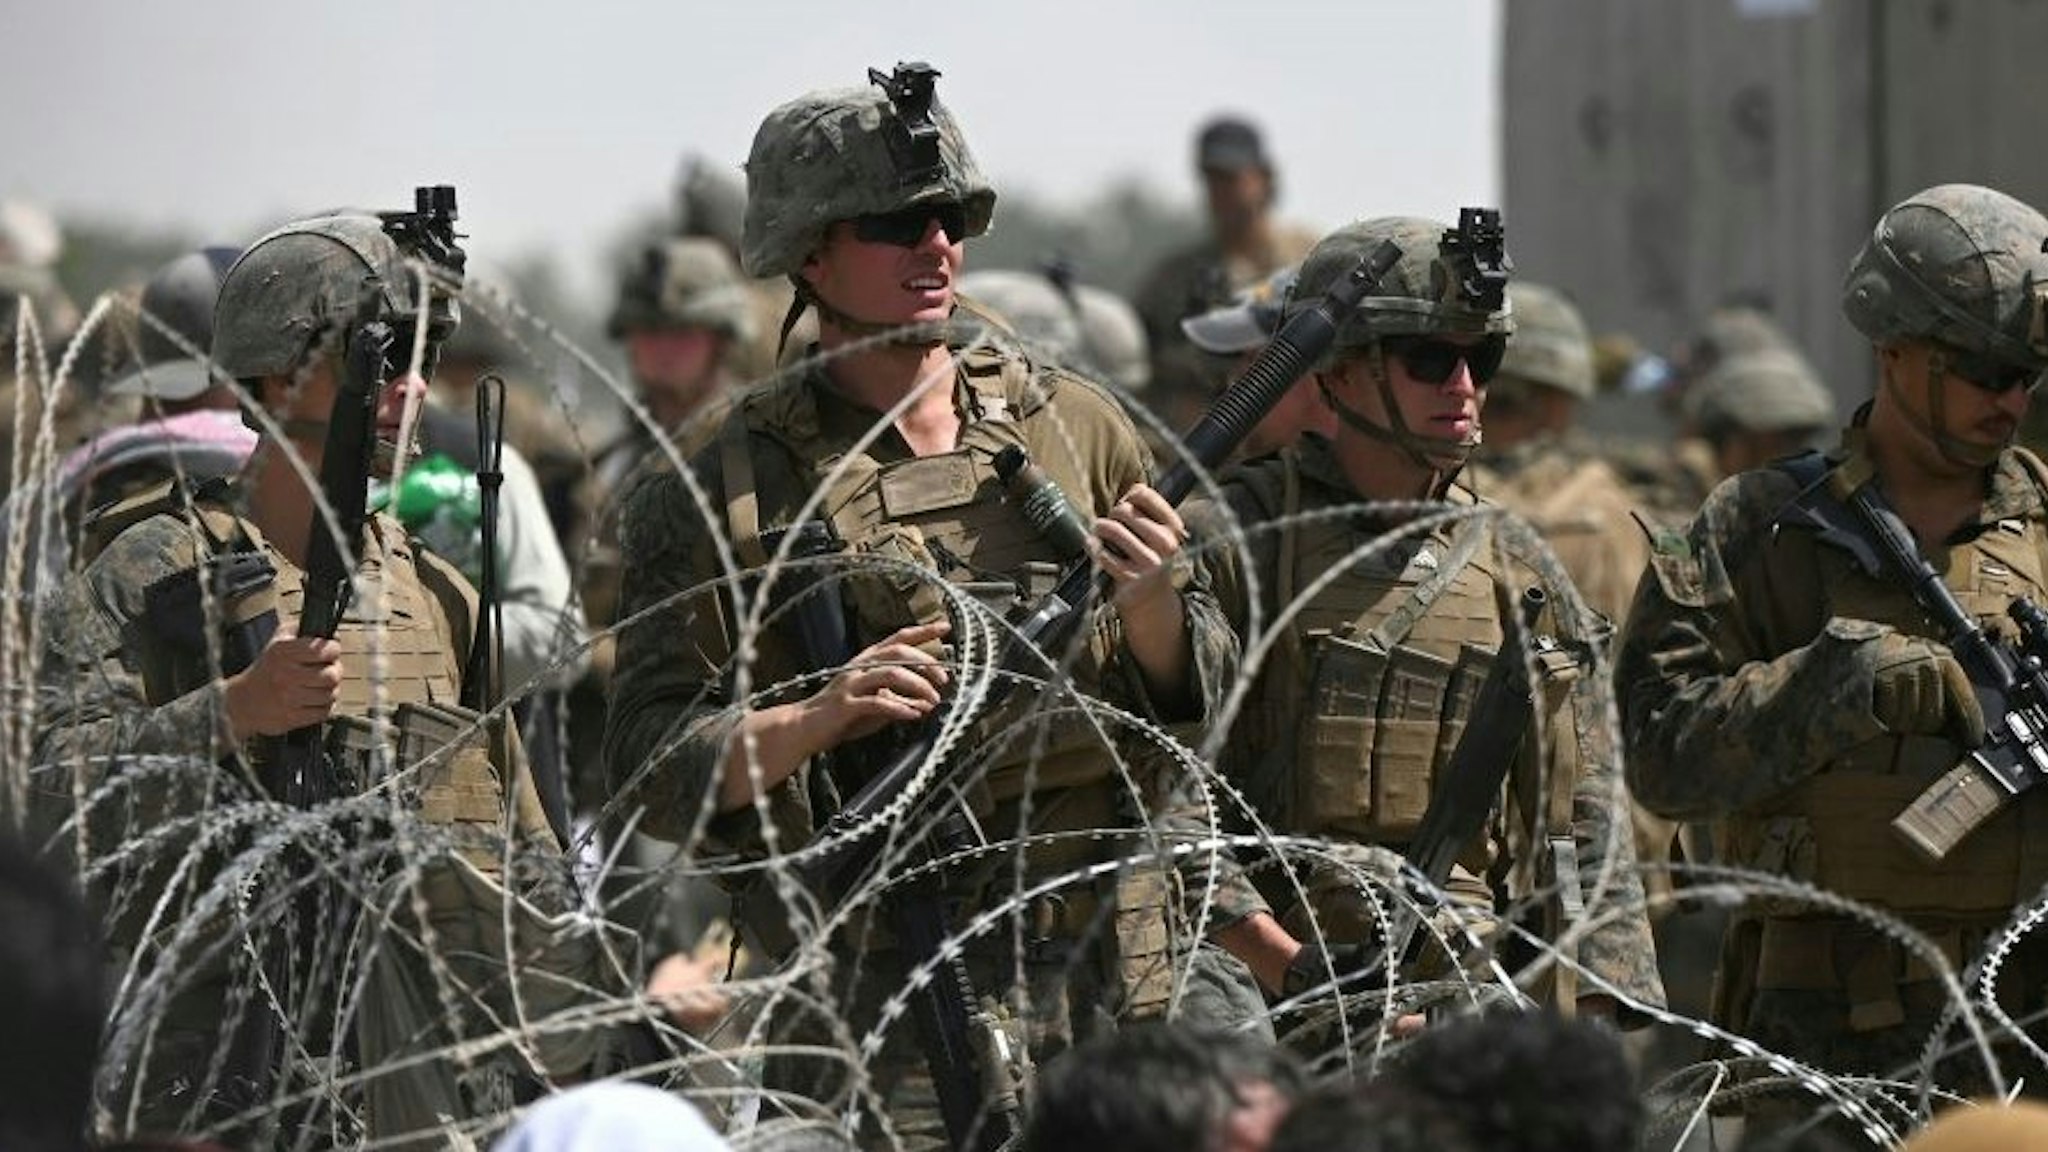 TOPSHOT - US soldiers stand guard behind barbed wire as Afghans sit on a roadside near the military part of the airport in Kabul on August 20, 2021, hoping to flee from the country after the Taliban's military takeover of Afghanistan. (Photo by Wakil KOHSAR / AFP) (Photo by